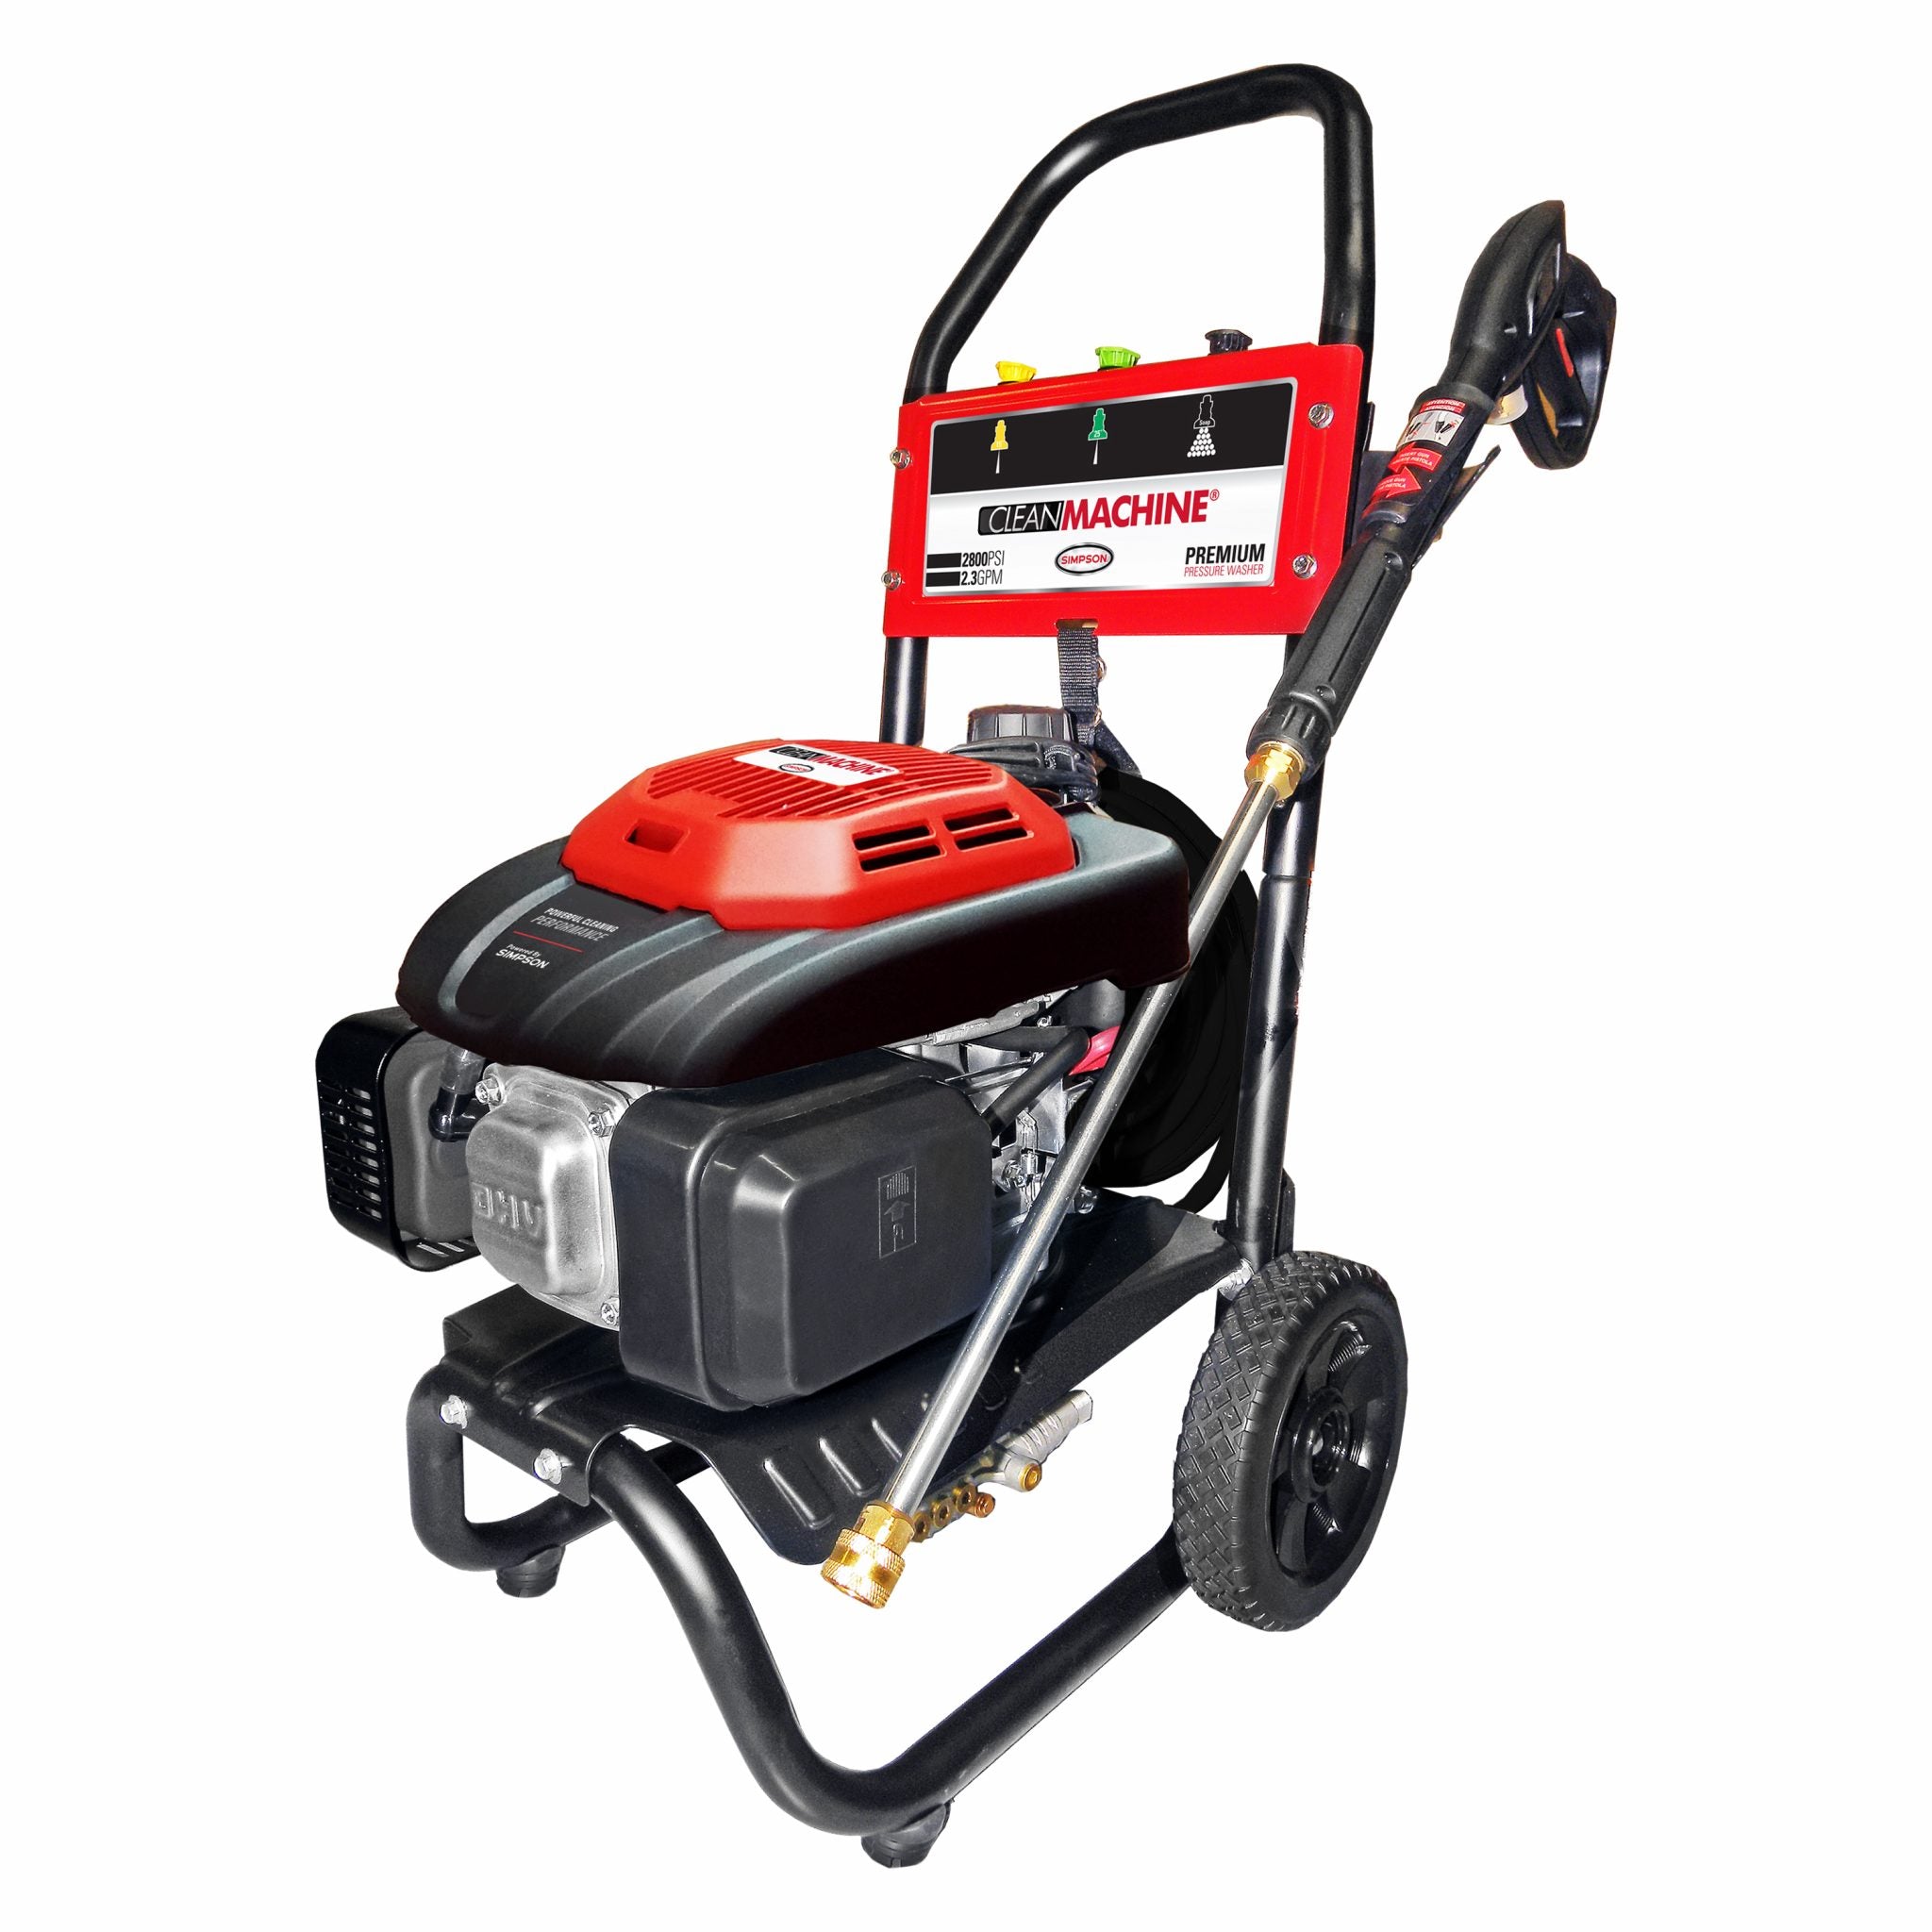 Simpson Clean Machine CM61081 2800-PSI Gas Pressure Washer with 159cc OHV Engine